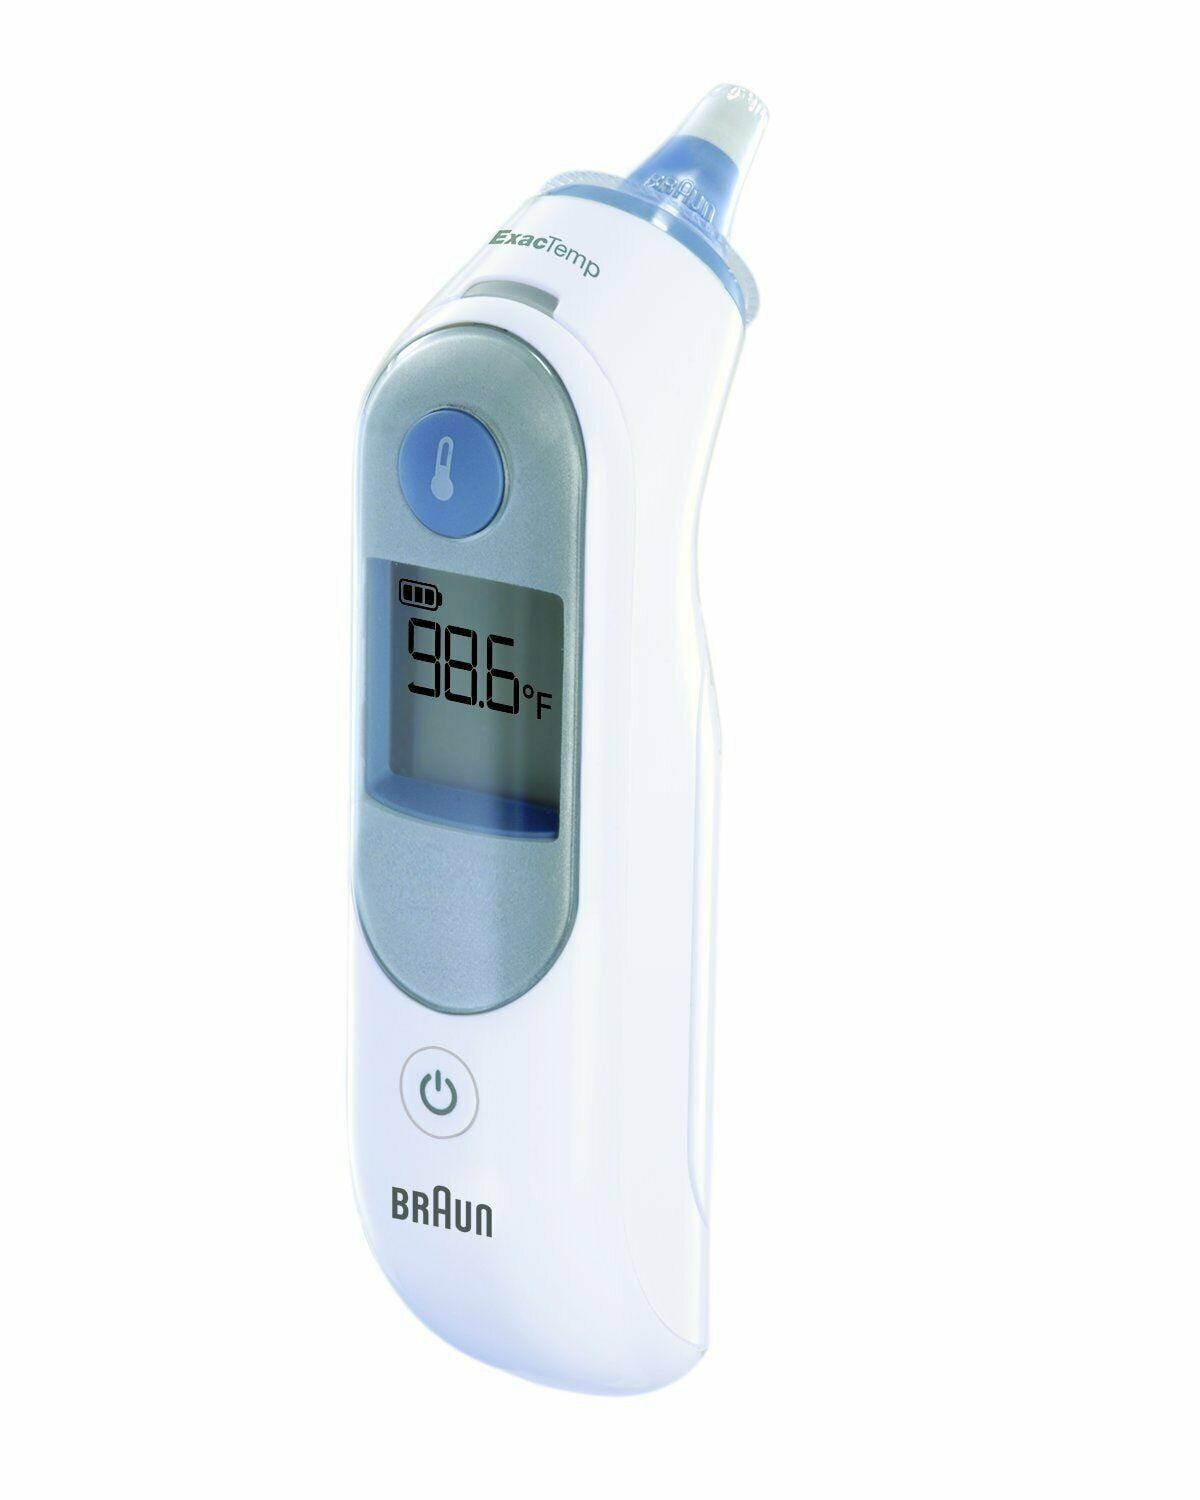 IRT6520B Black Edition Braun ThermoScan 7 Ear Thermometer with Age Precision 